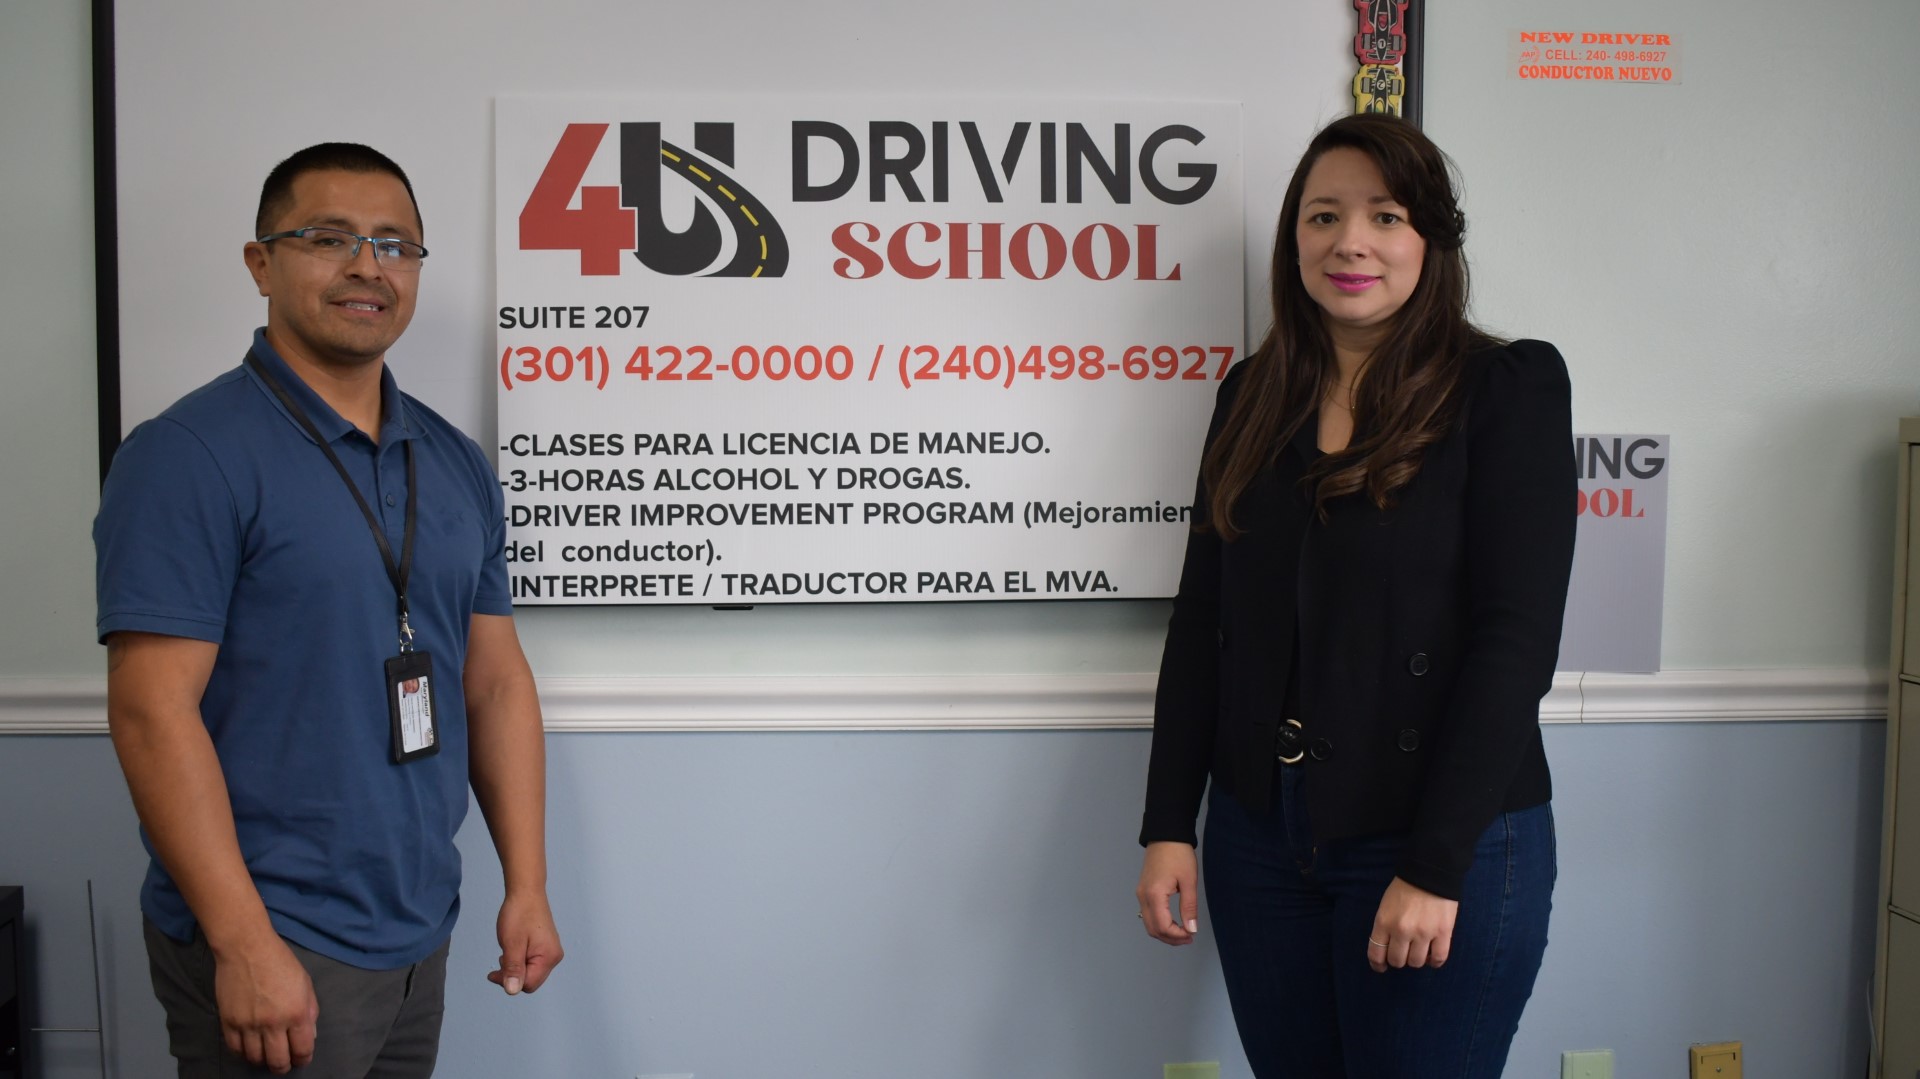 4U Driving School staff standing in front of sign